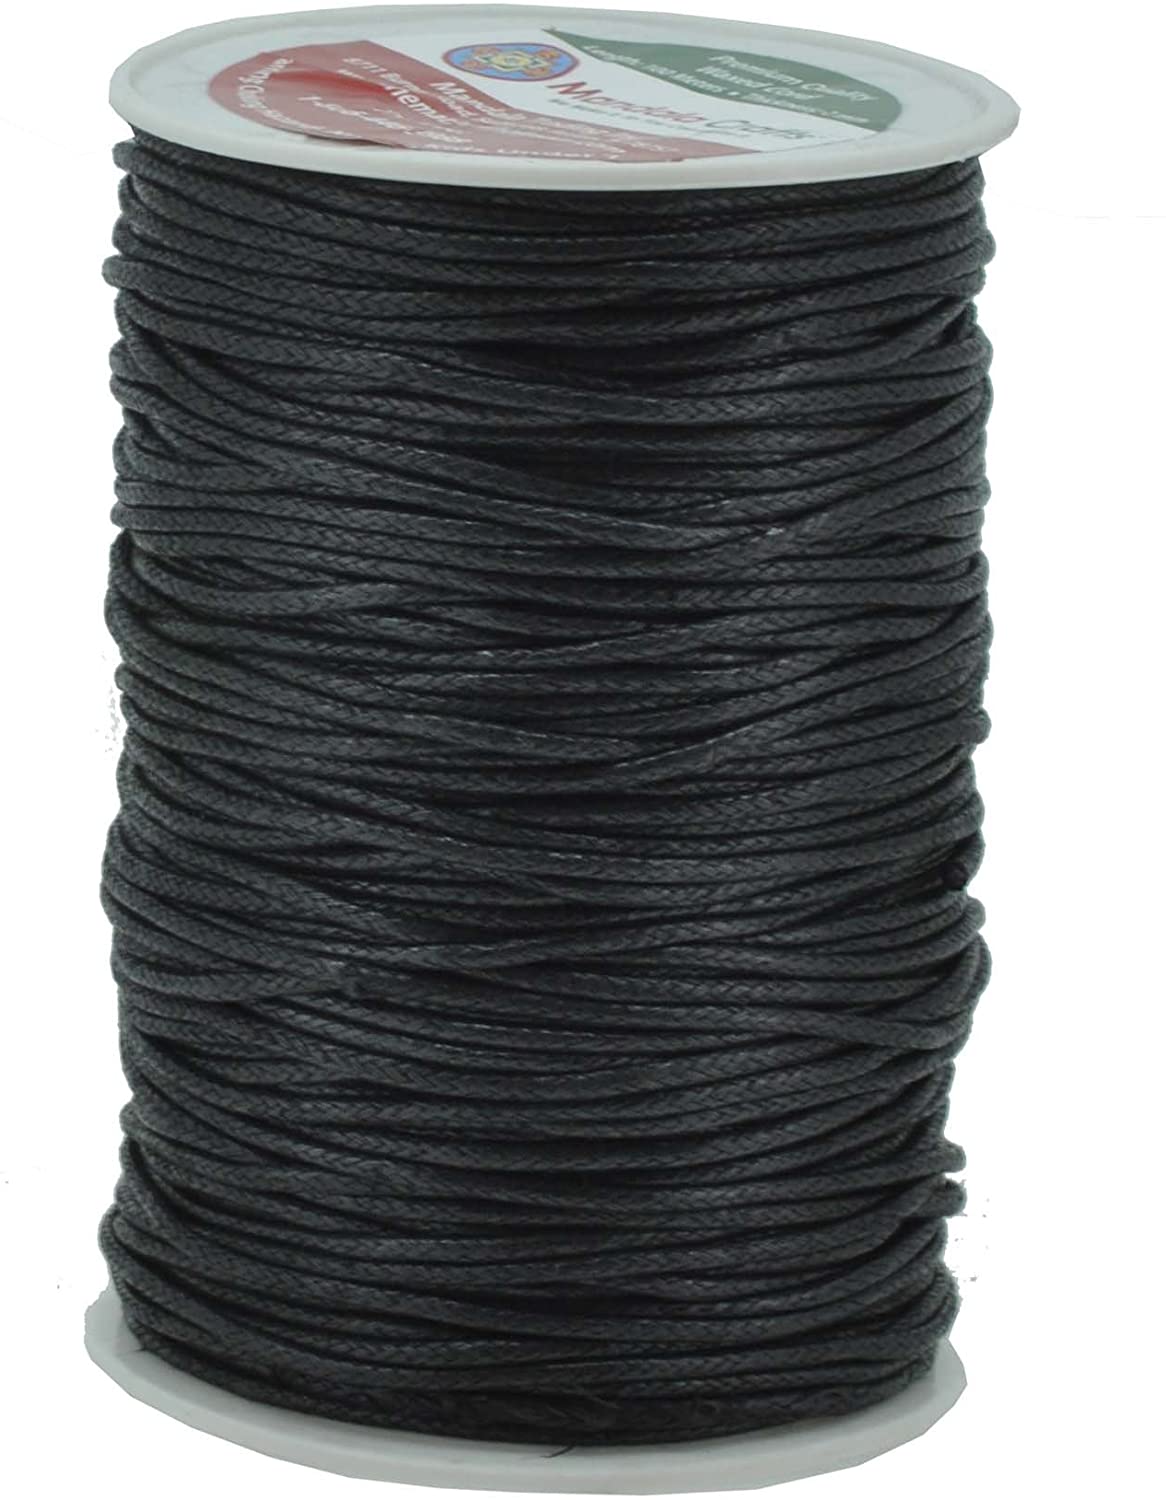 Round Leather Cord 2mm String, 27 Yards Rope for Jewelry Making